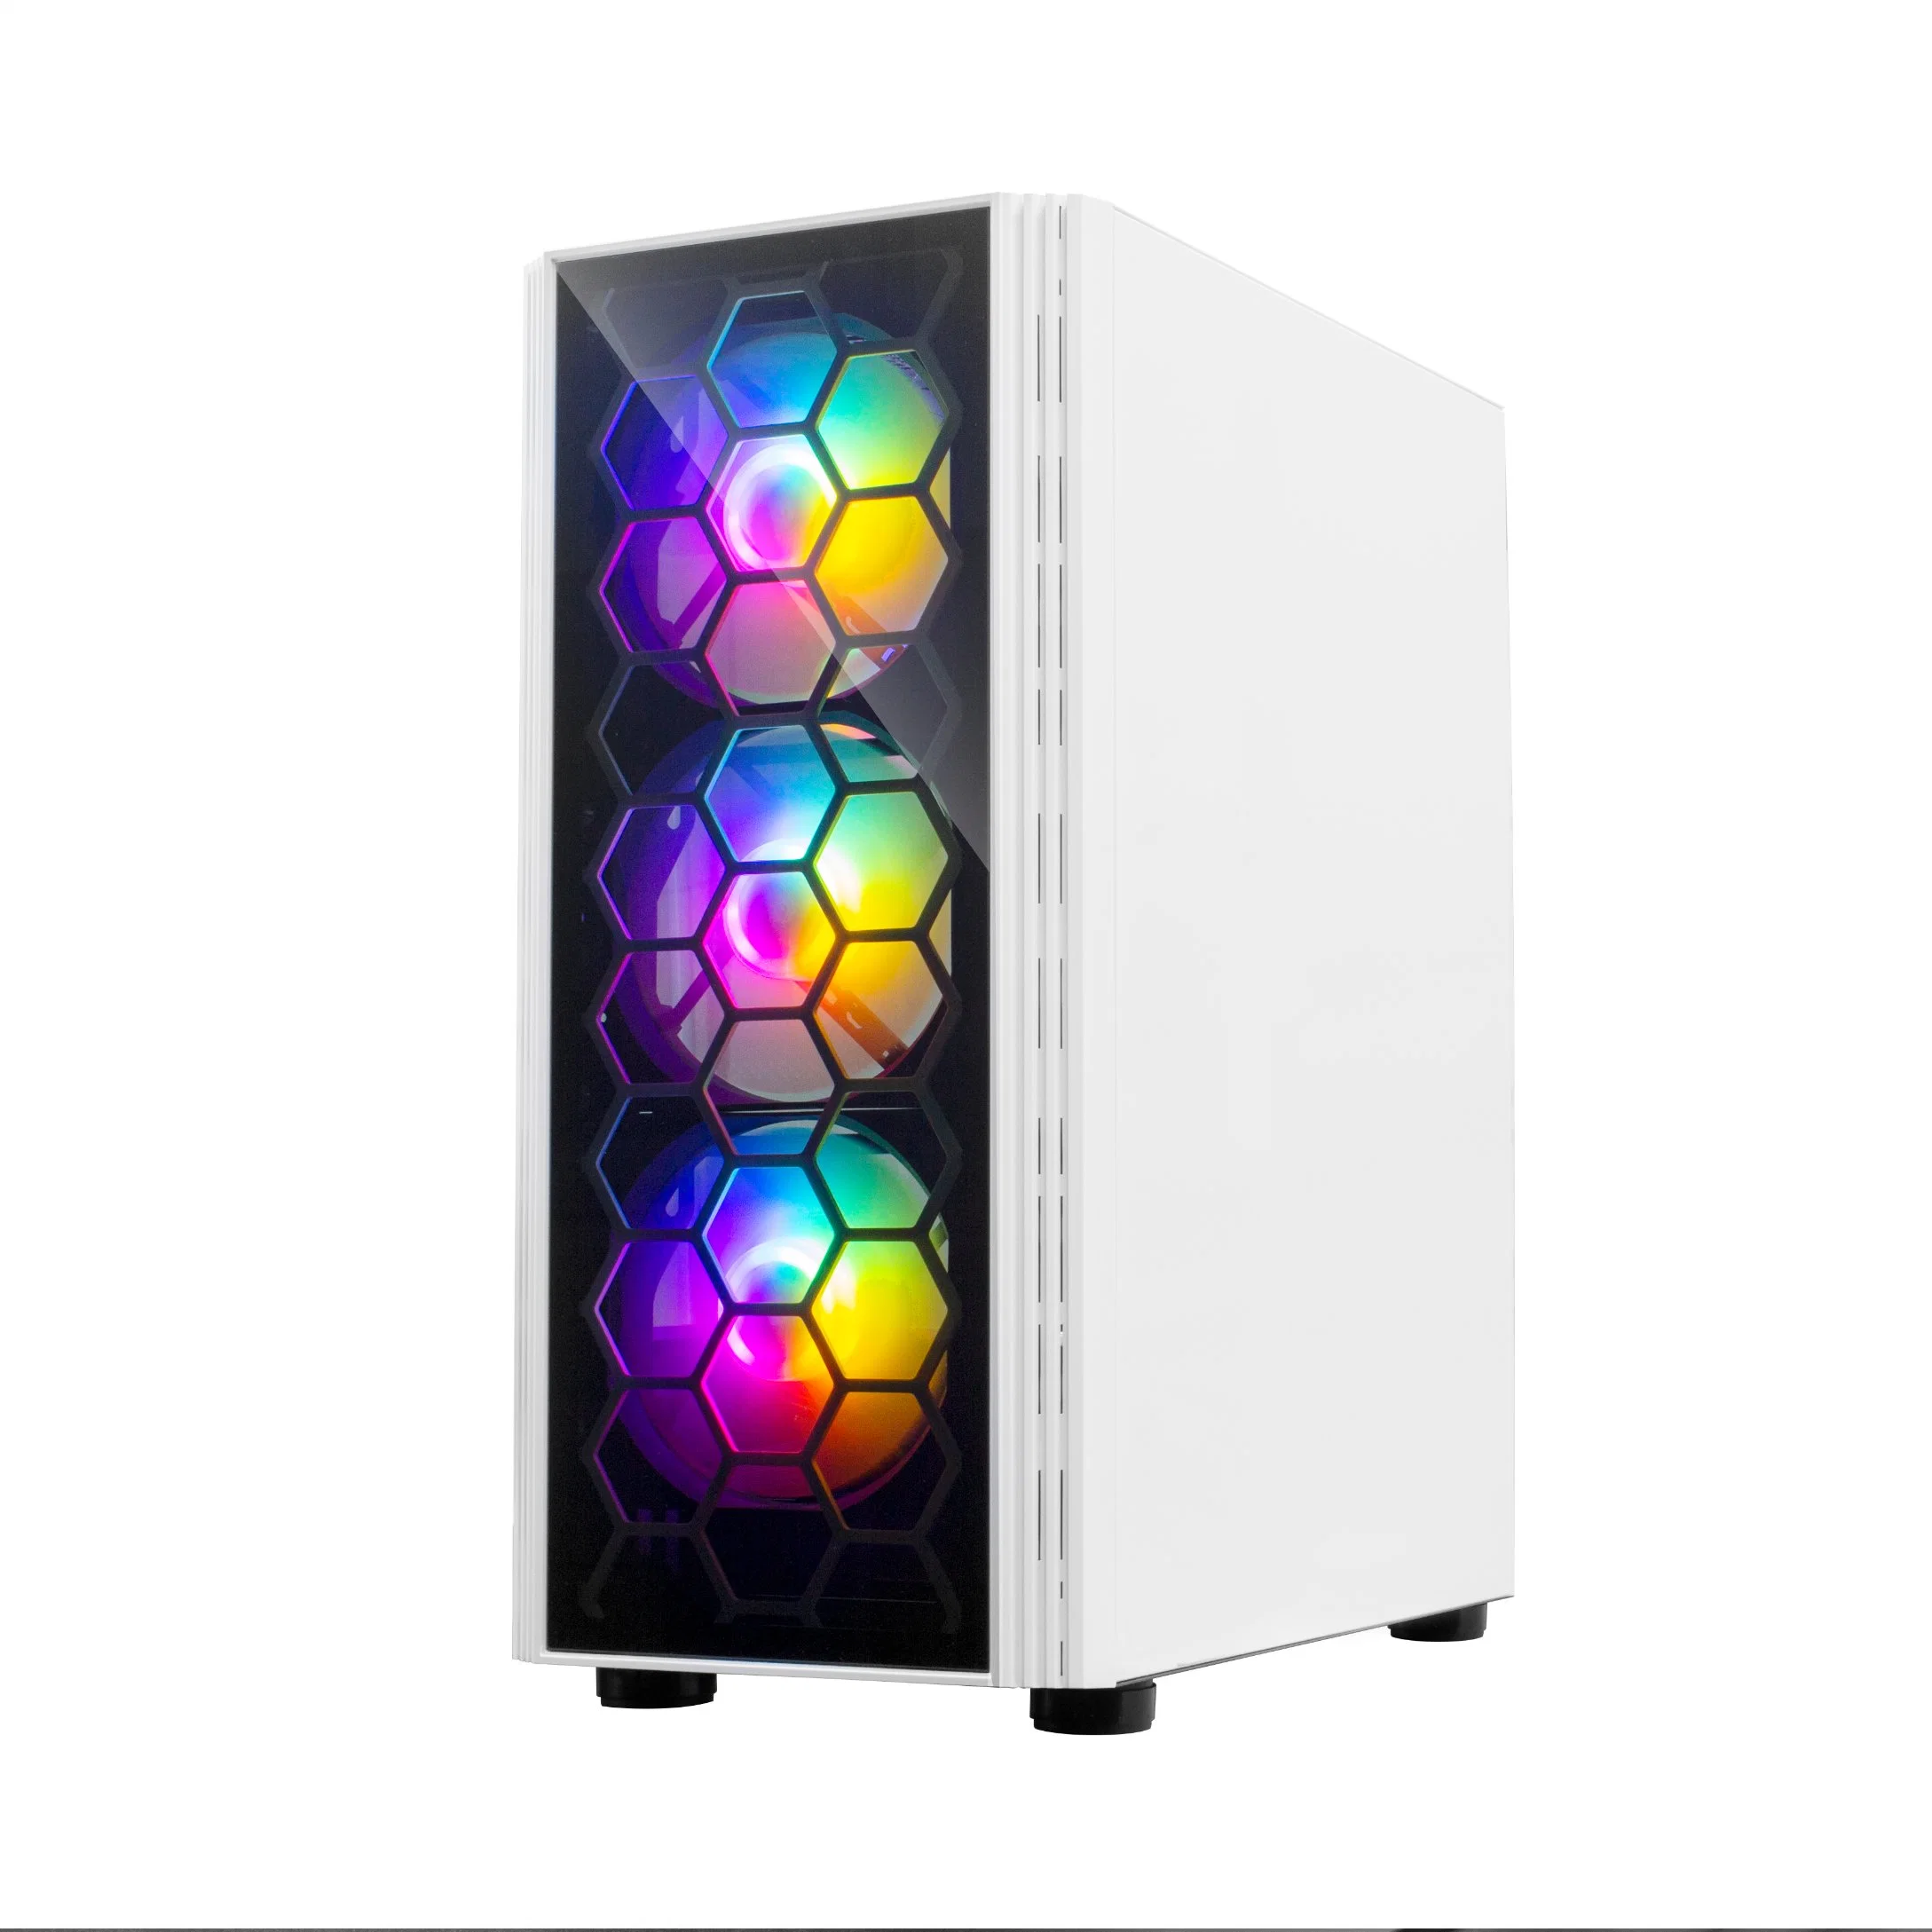 Hot Sale ATX Desktop Computer Tower PC Gaming Case with Top Dust Filter